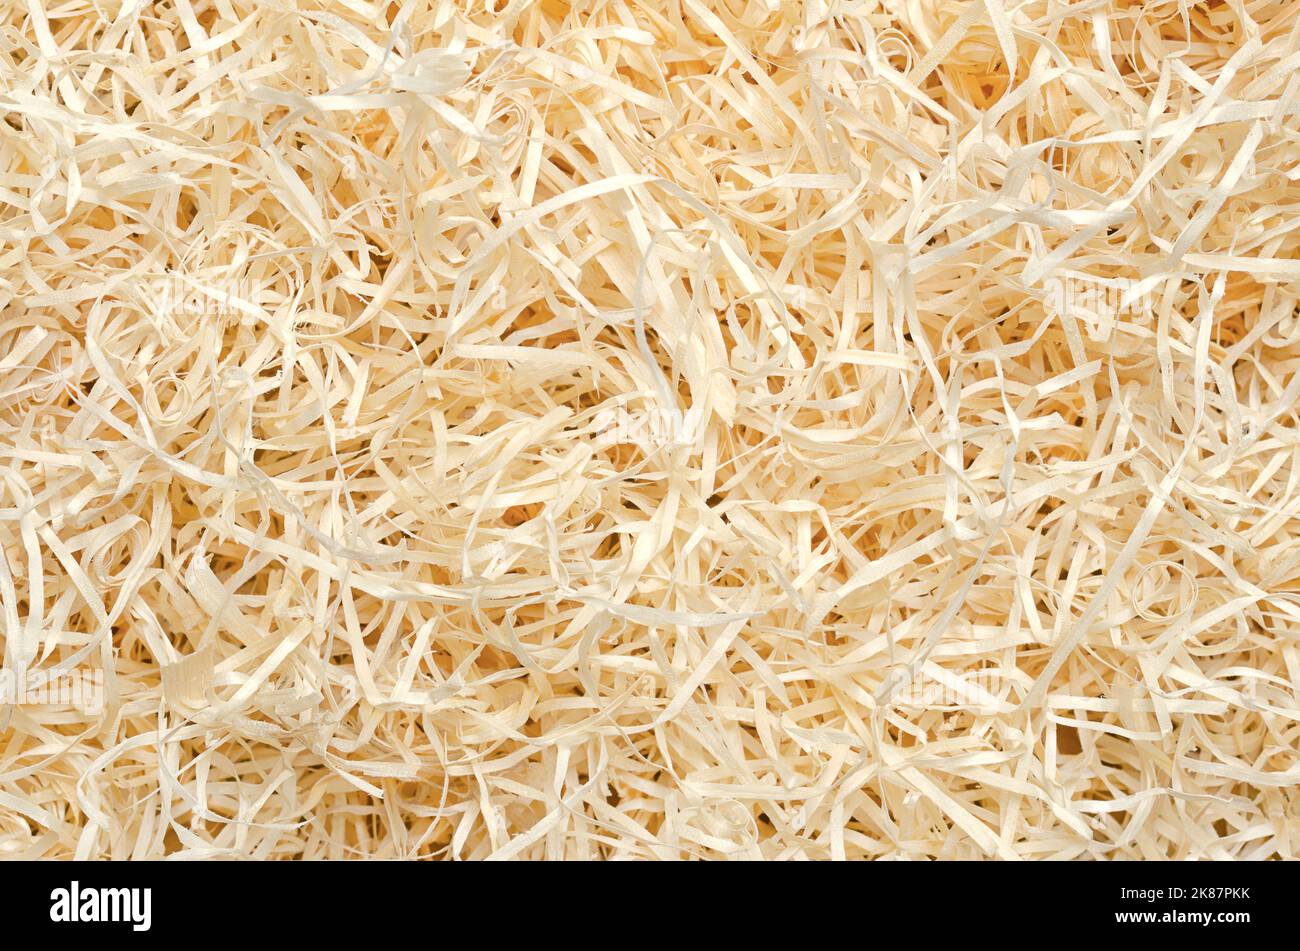 Wood wool background from above. Also known as excelsior, made of wood slivers cut from logs. Used in packaging. Stock Photo